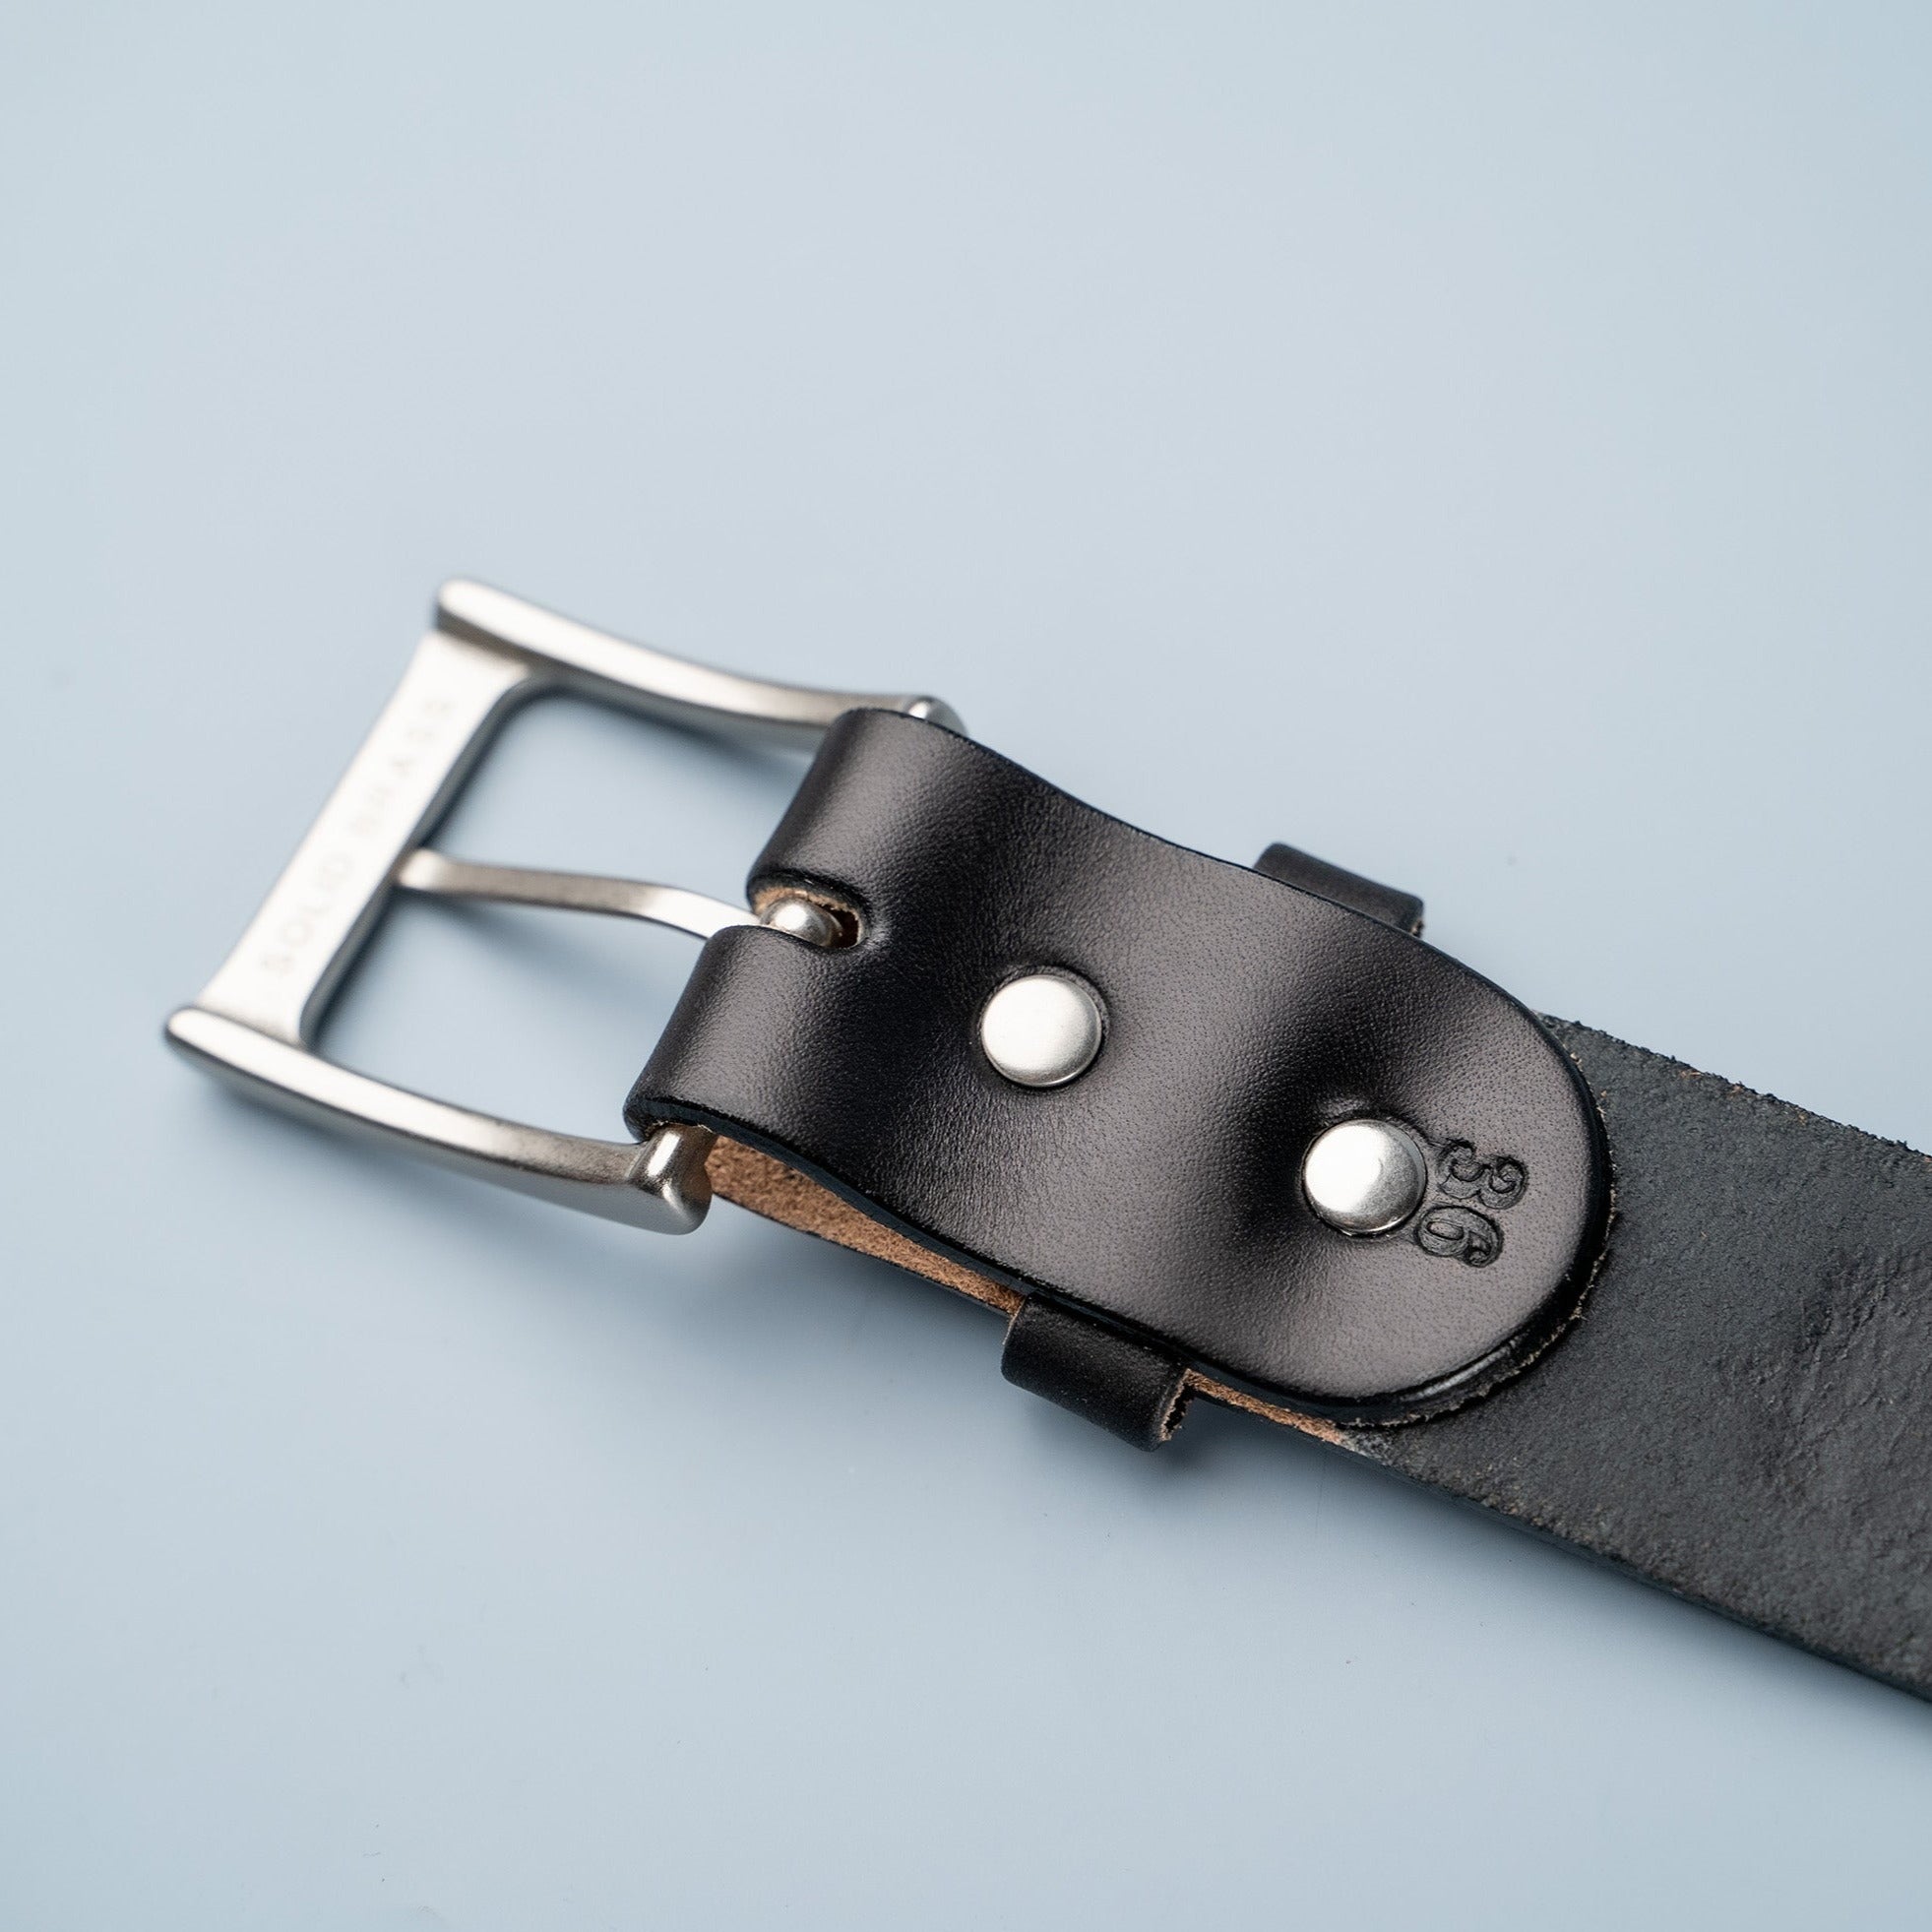 Personalized Leather Belt - Made in American - Bridle Leather